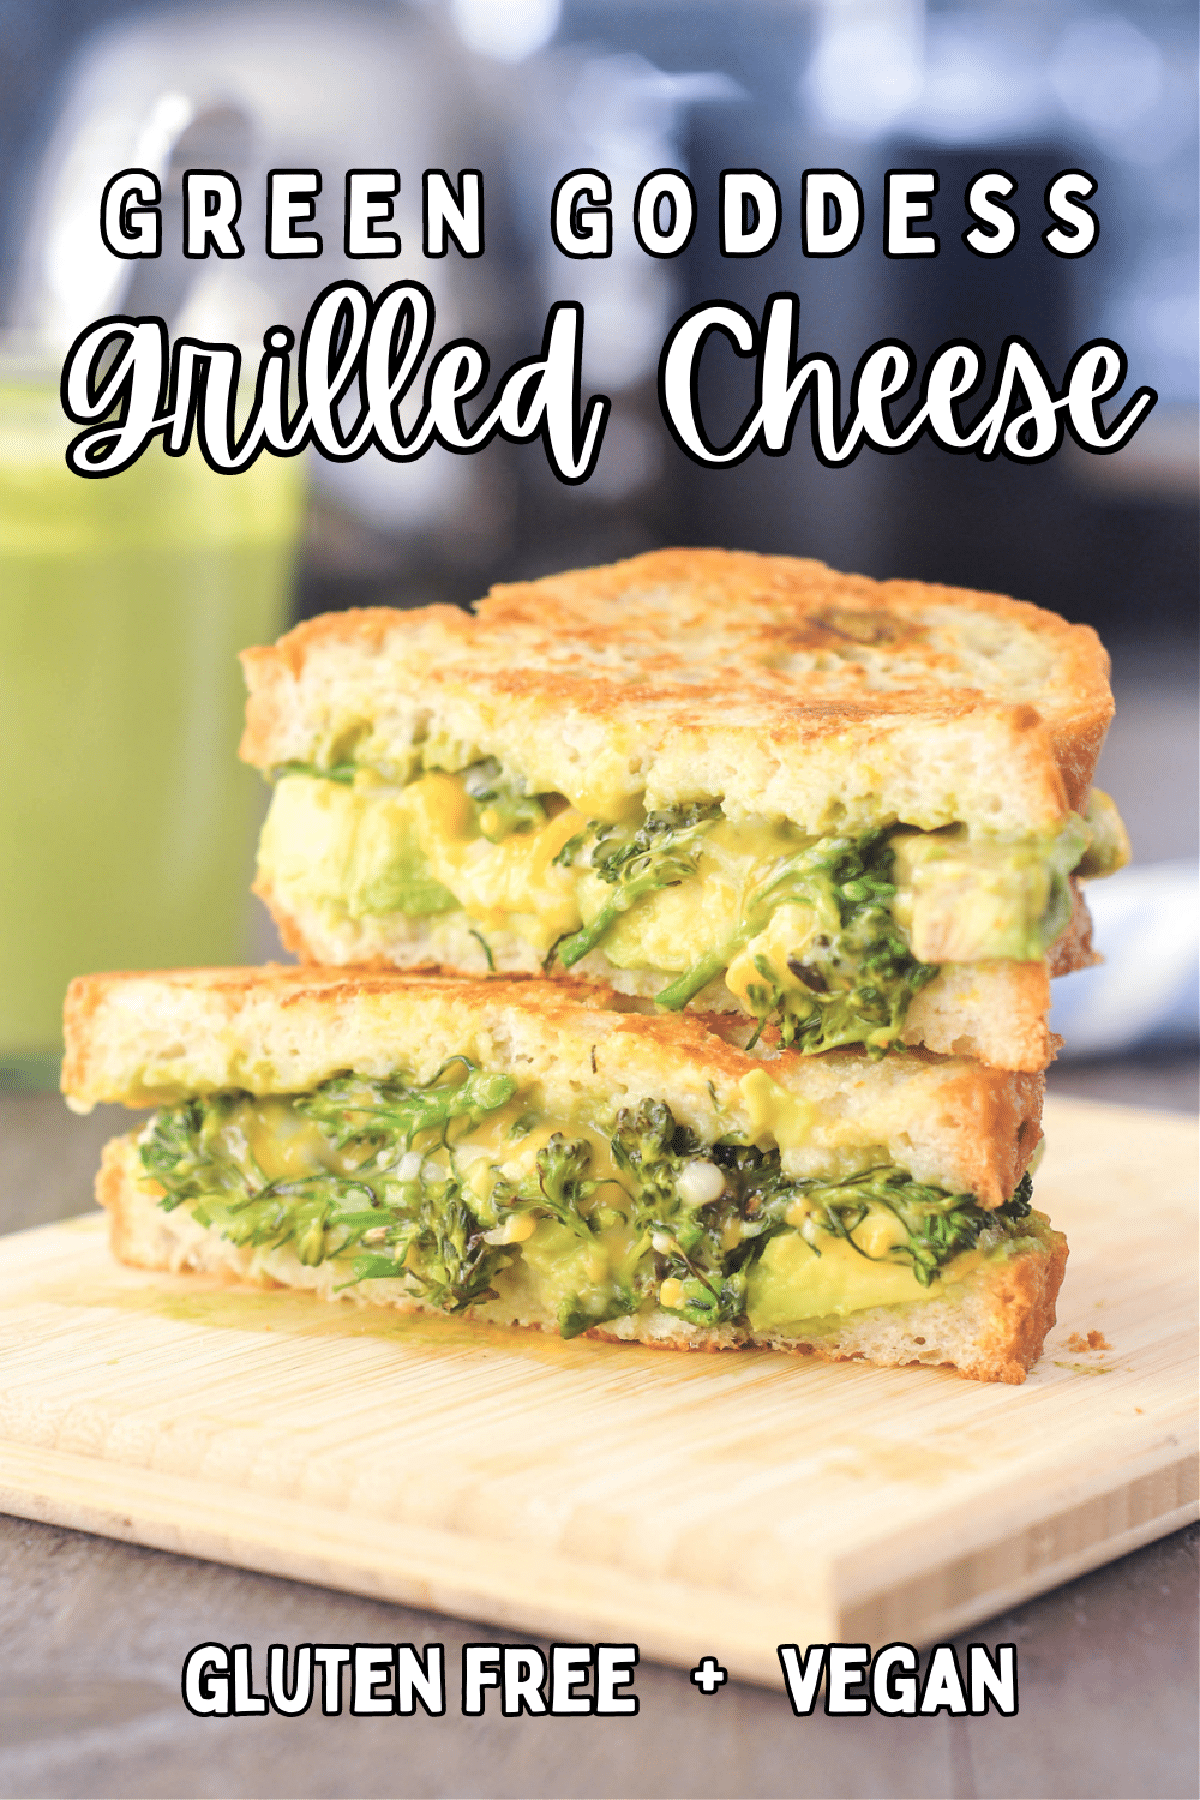 Green Goddess grilled cheese sandwich sliced in half and stacked on a small light colored wood cutting board. The sandwich has Green Goddess dressing, broccolini trees, sliced avocado, and melted dairy free cheese. A glass jar of Green Goddess dressing is blurred in the background.